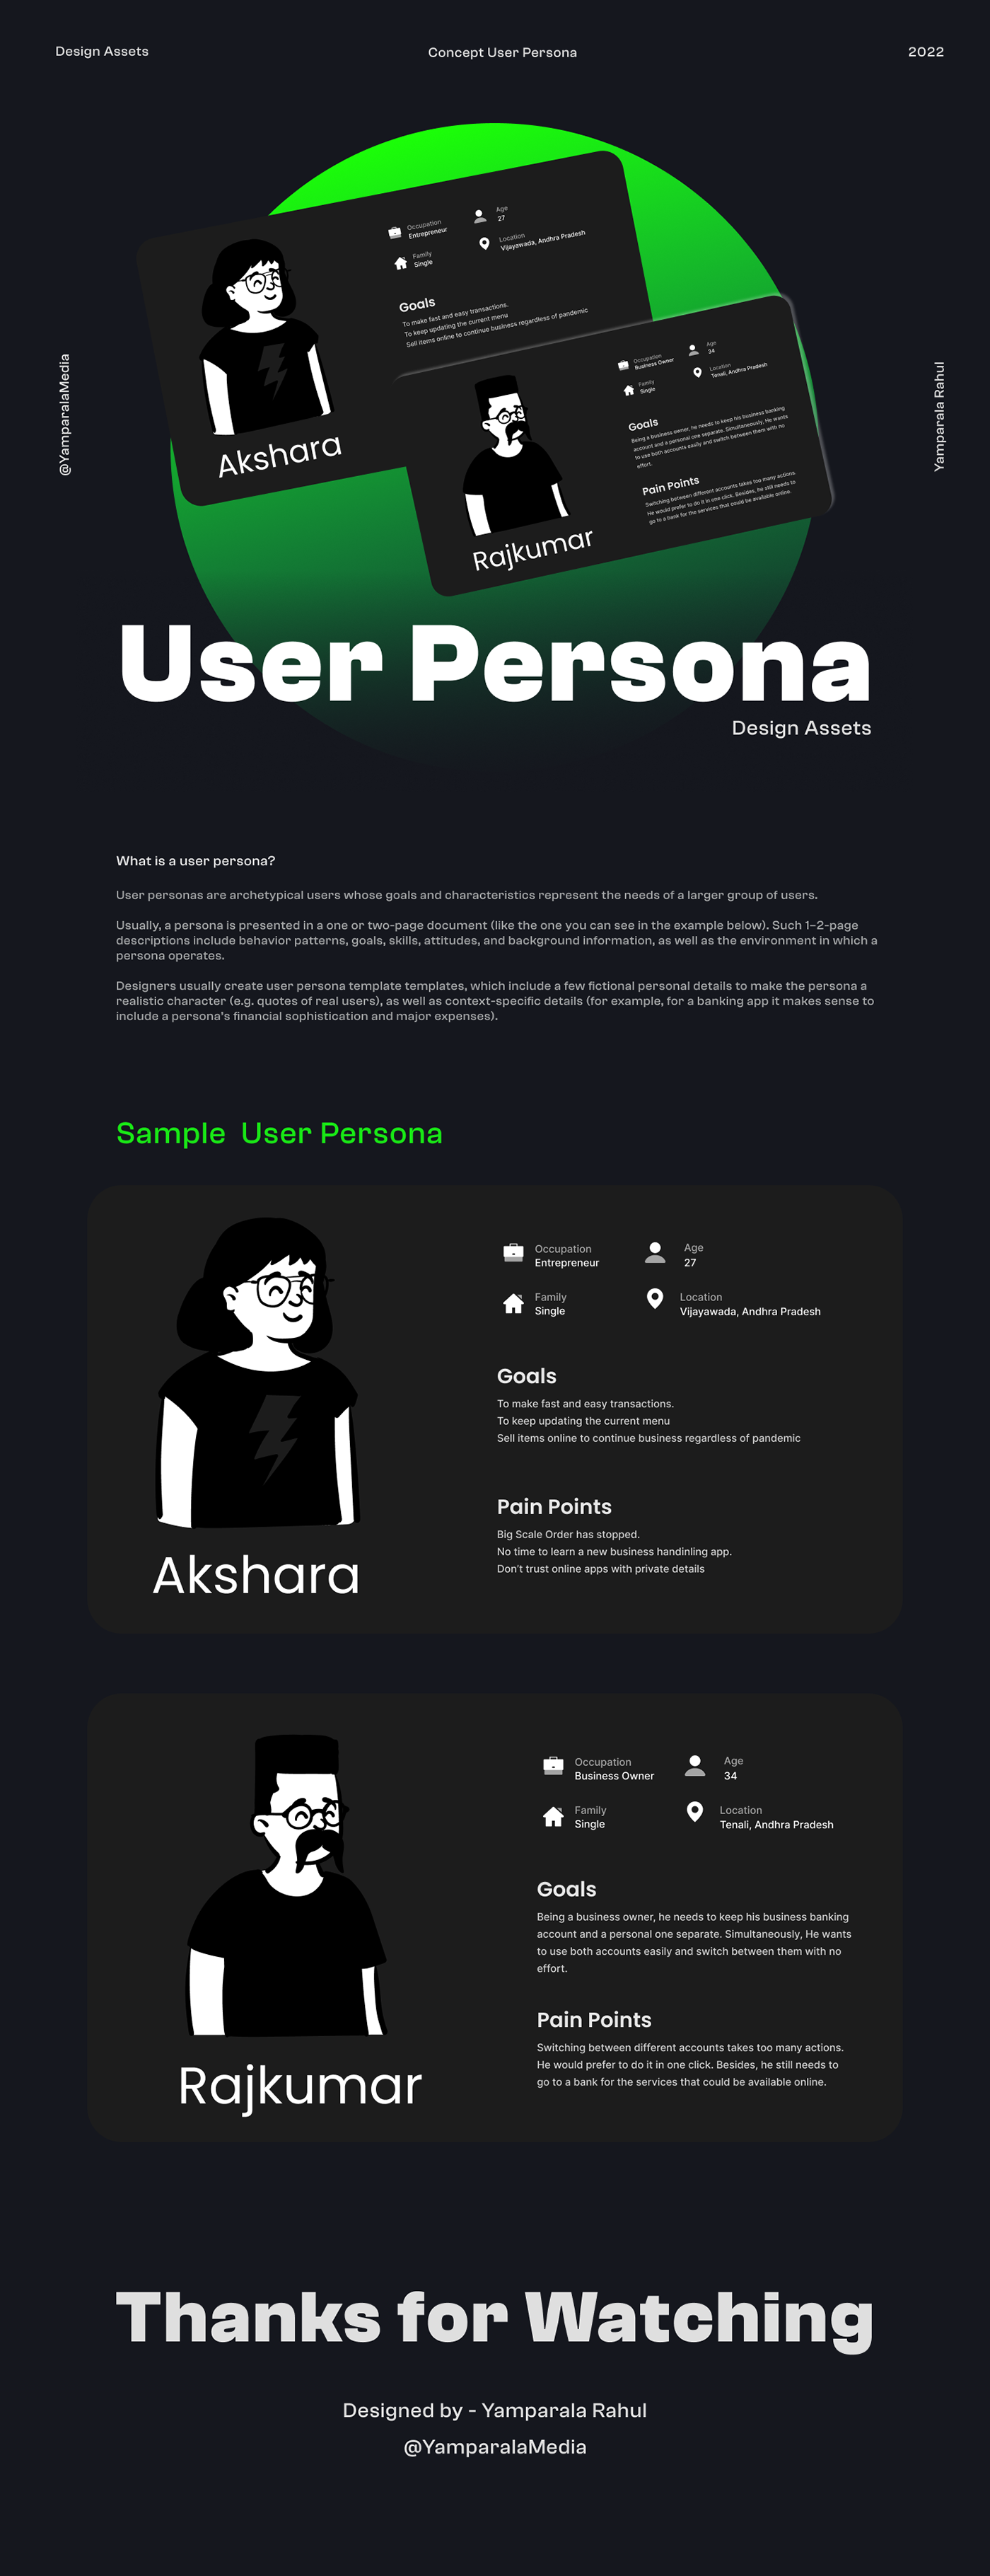 Project UI UI/UX user user experience user interface UserInterface ux Yamparala Rahul YamparalaMedia